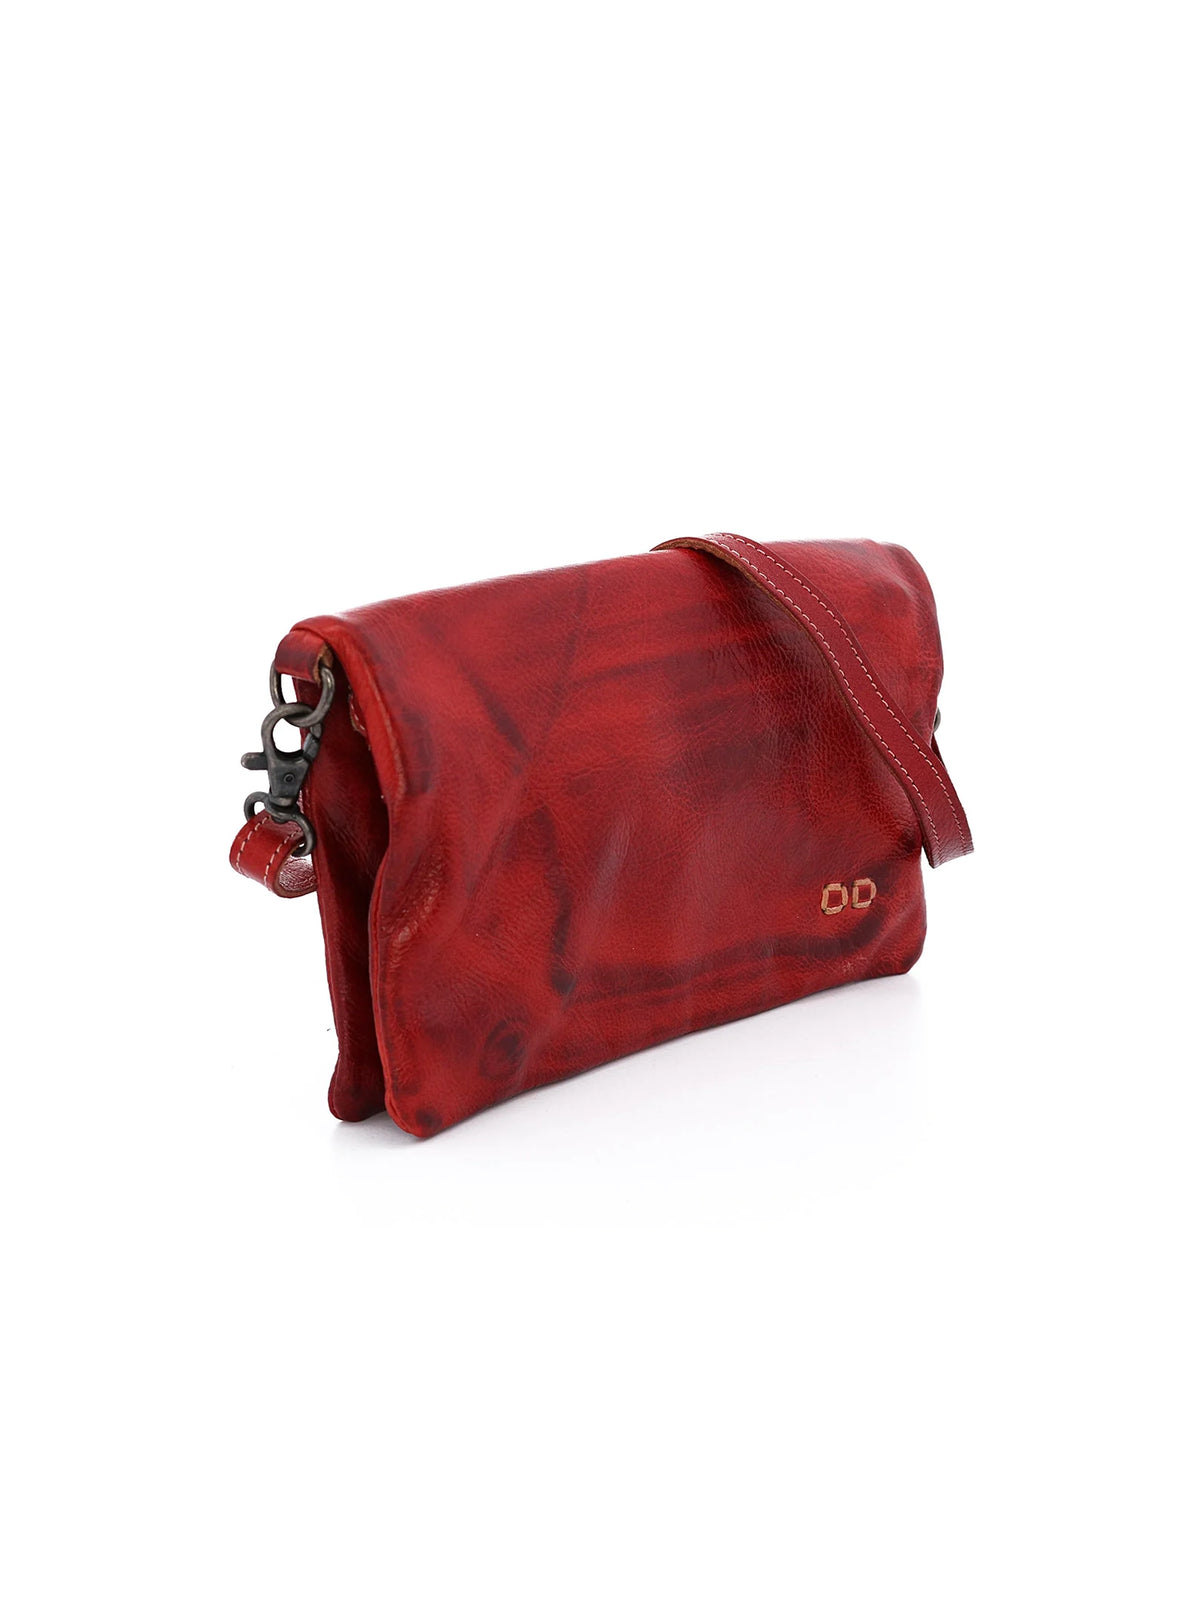 BEDSTU cadence convertible crossbody clutch wallet in red rustic leather